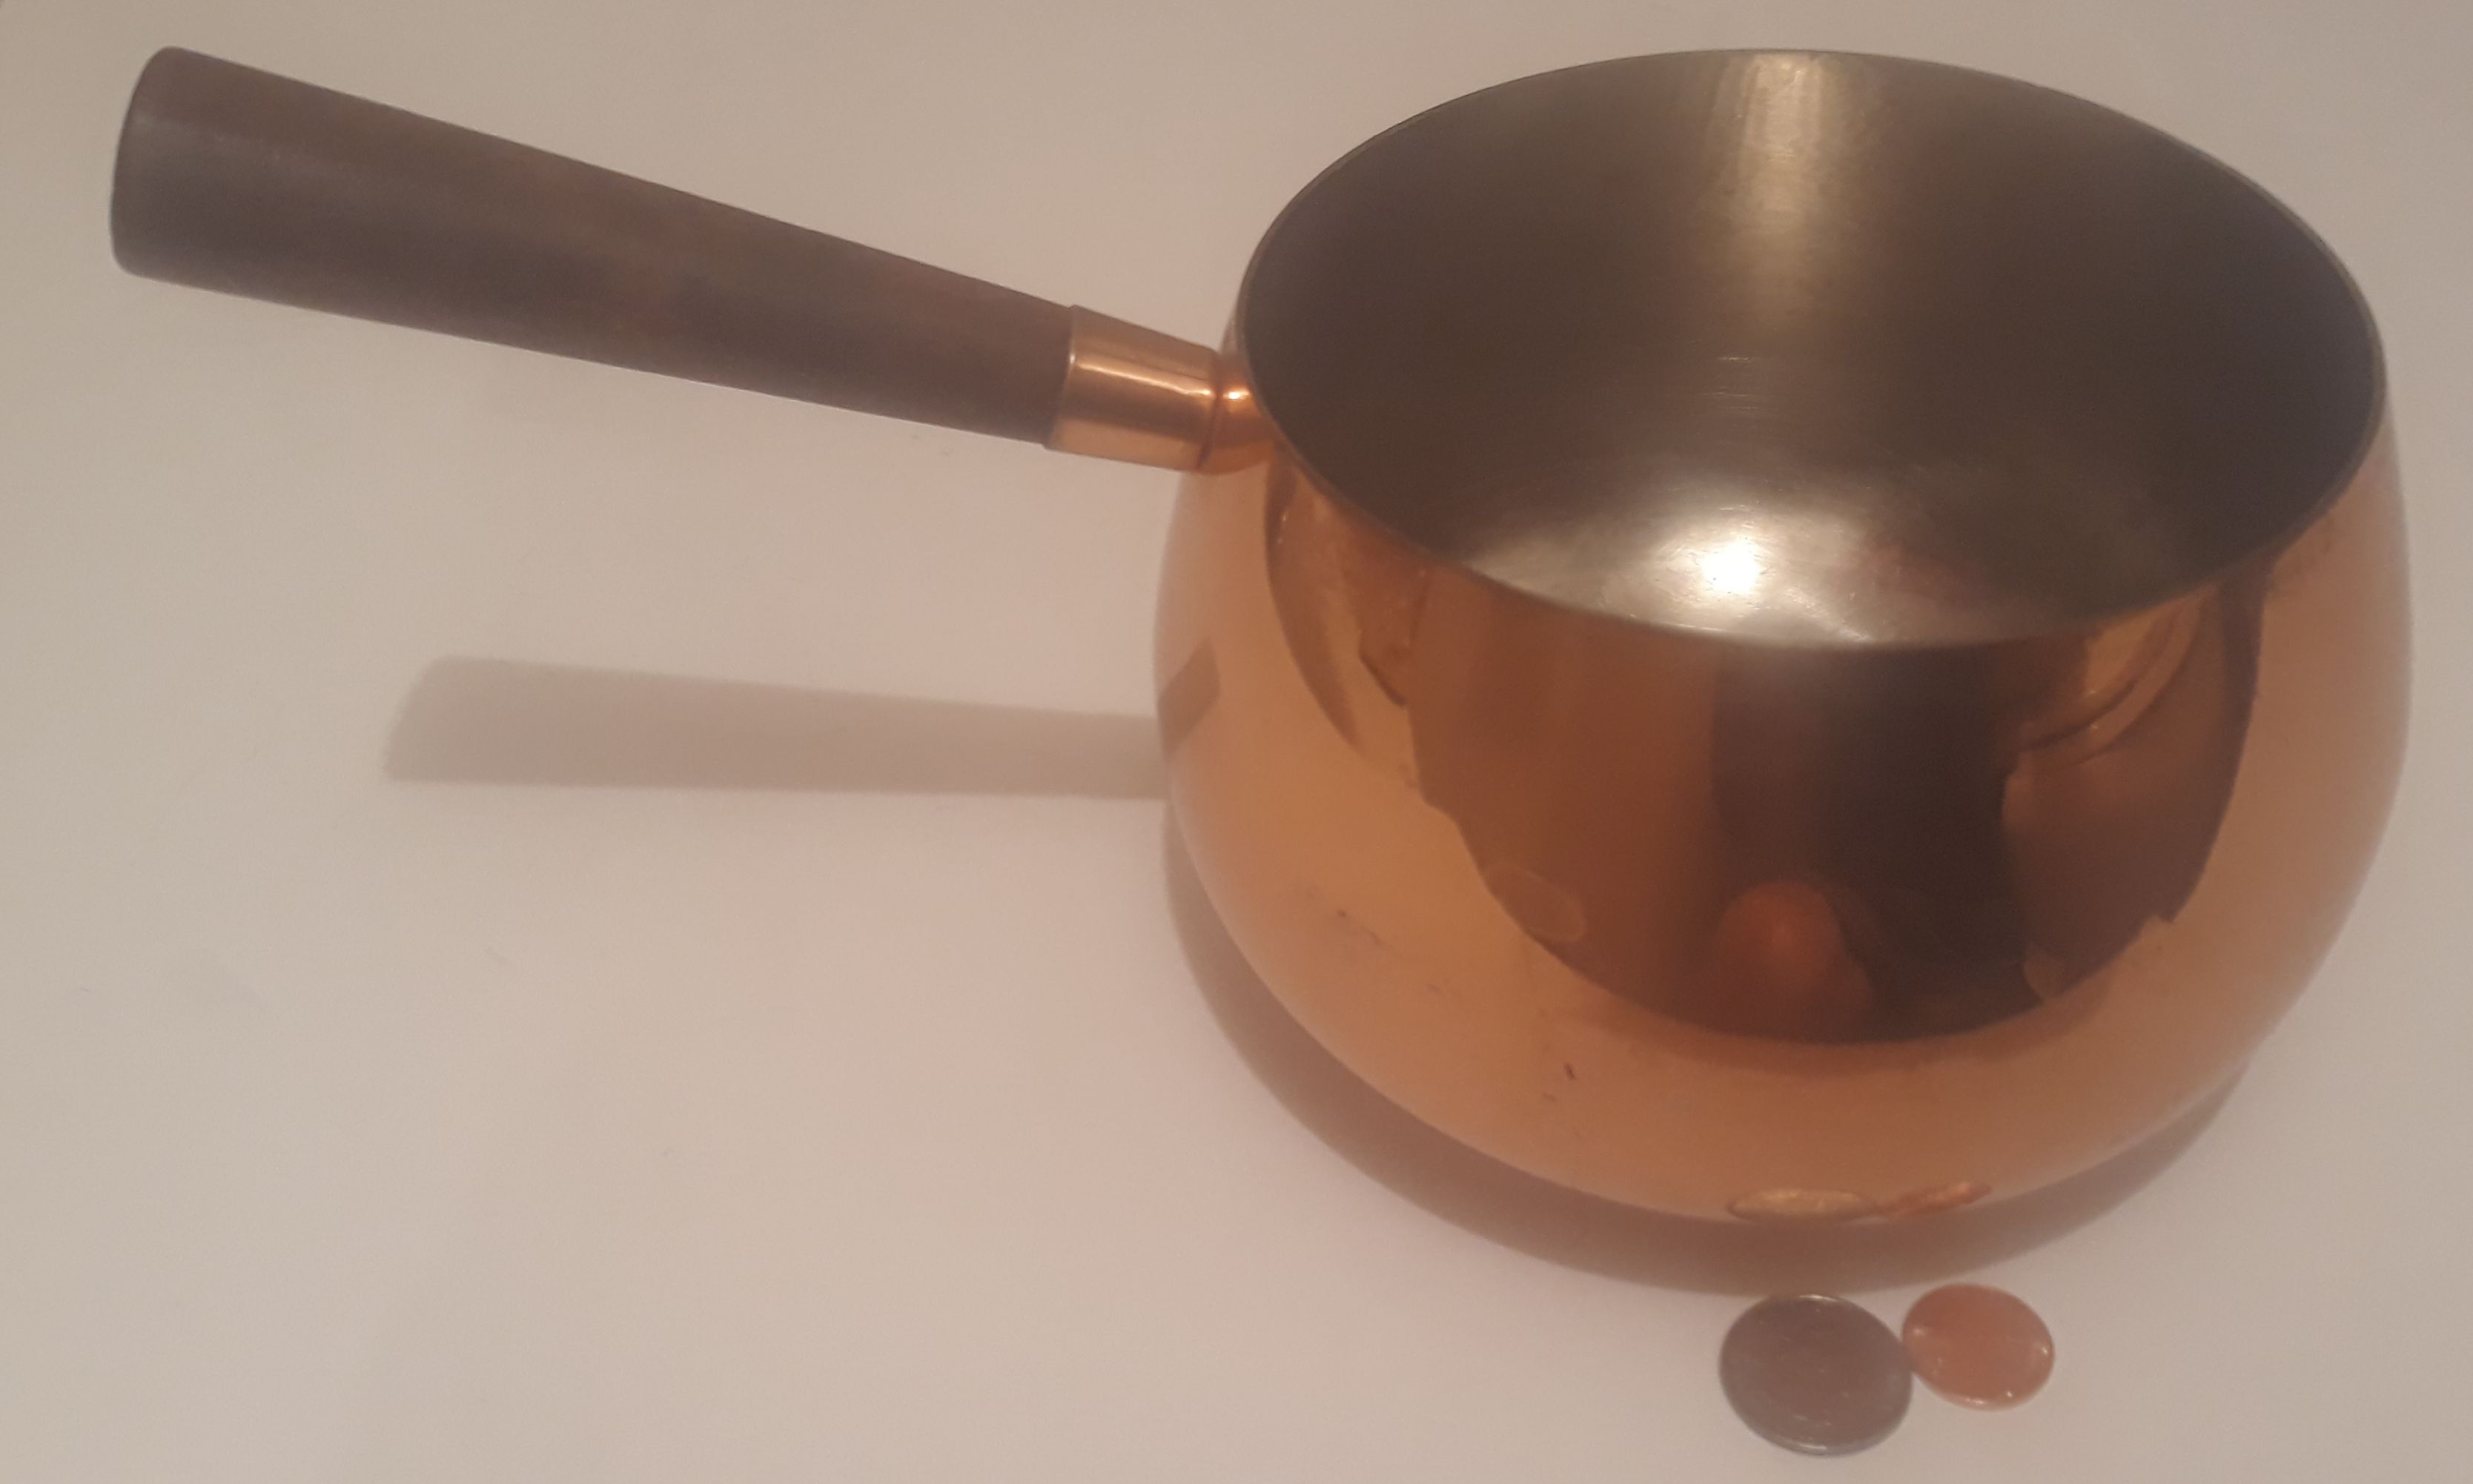 Vintage Copper Metal Cooking Pot with Wooden Handle, 10" Long, and 6" x 4" Pot Size, Kitchen Decor, Shelf Display, Cooking,